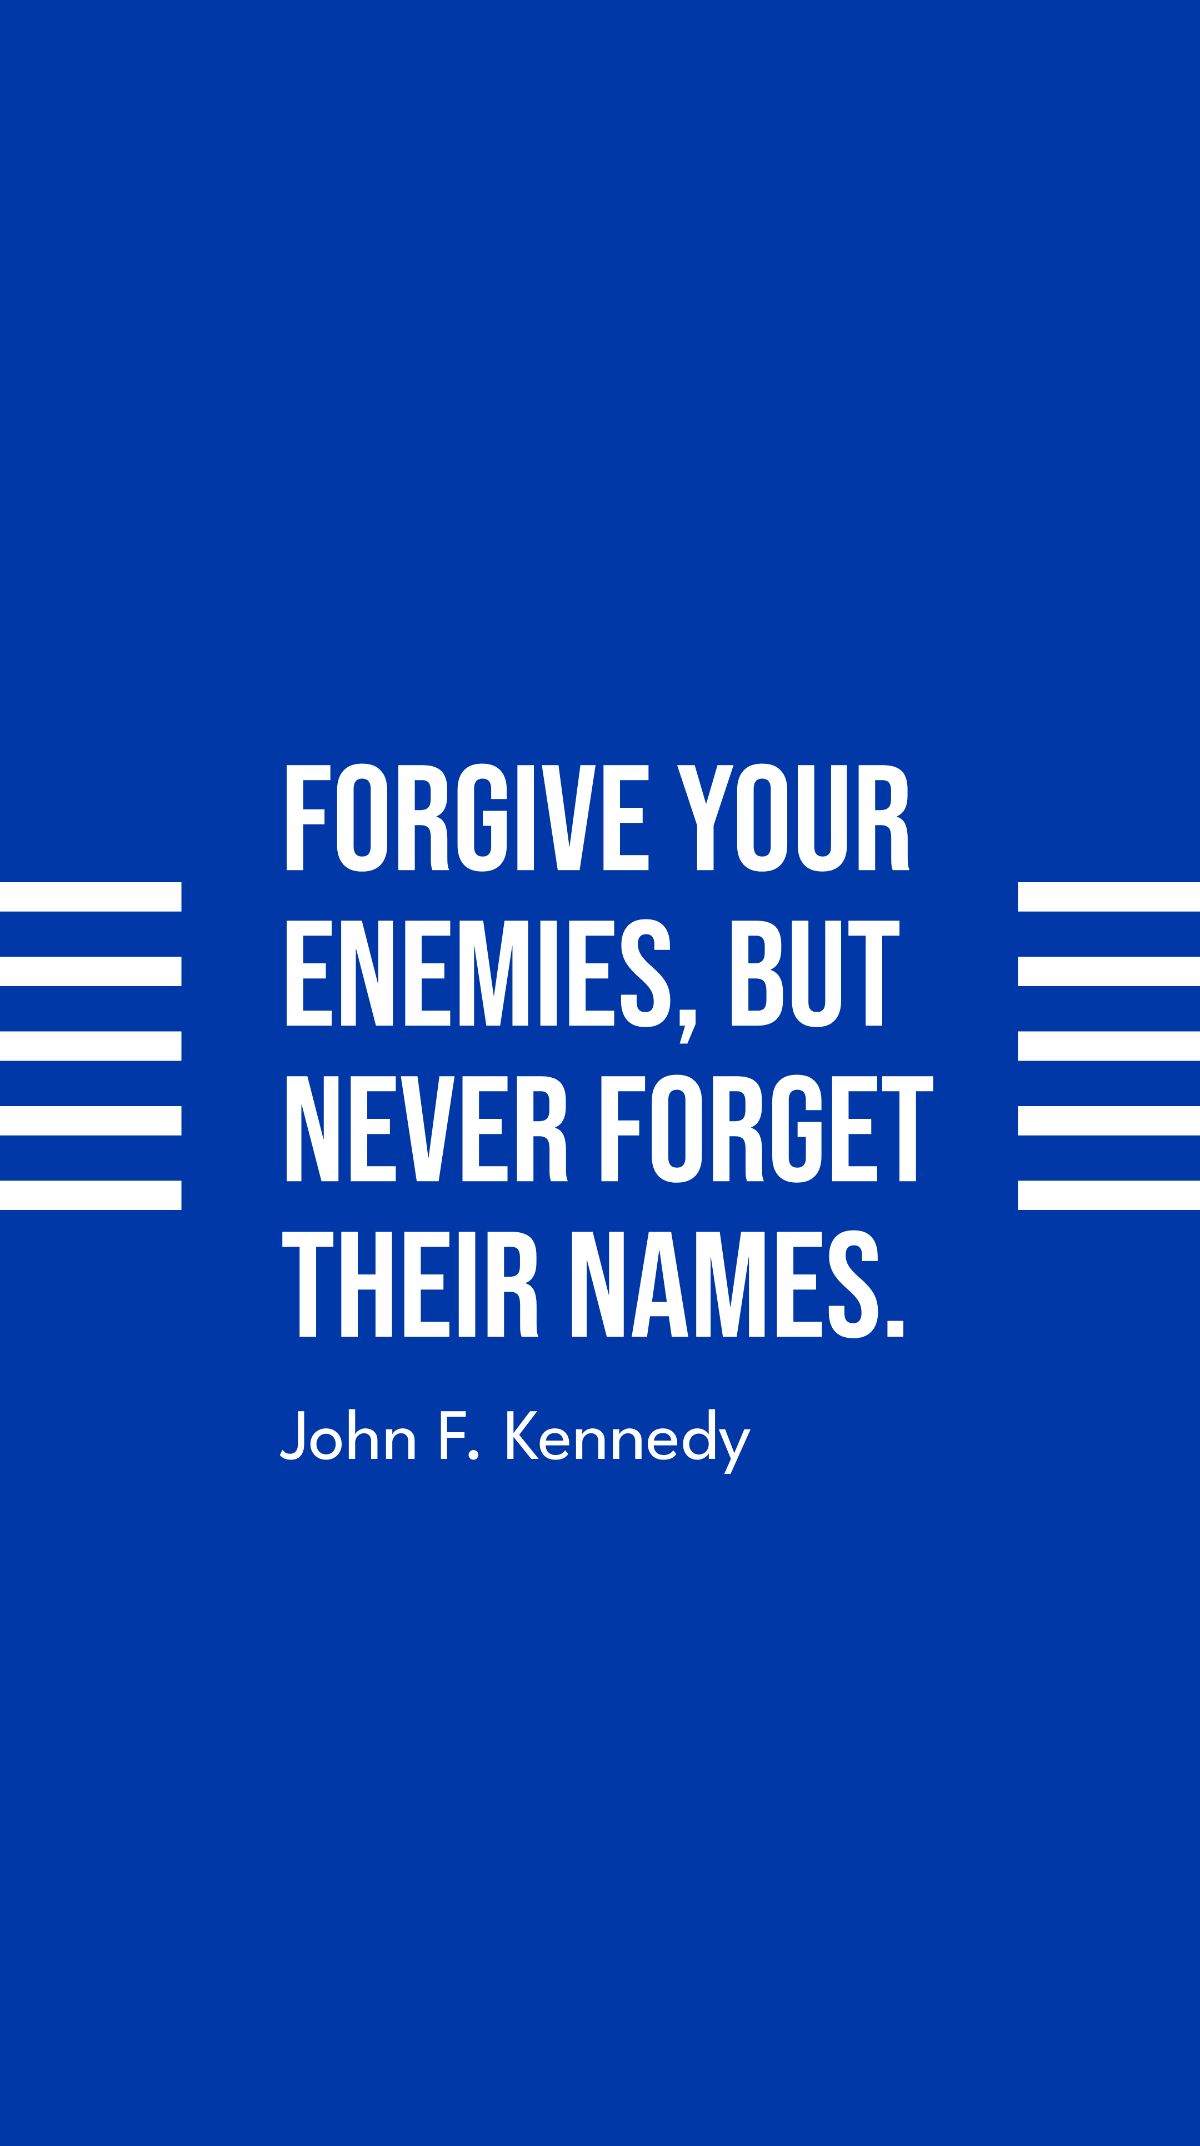 John F. Kennedy - Forgive your enemies, but never forget their names.